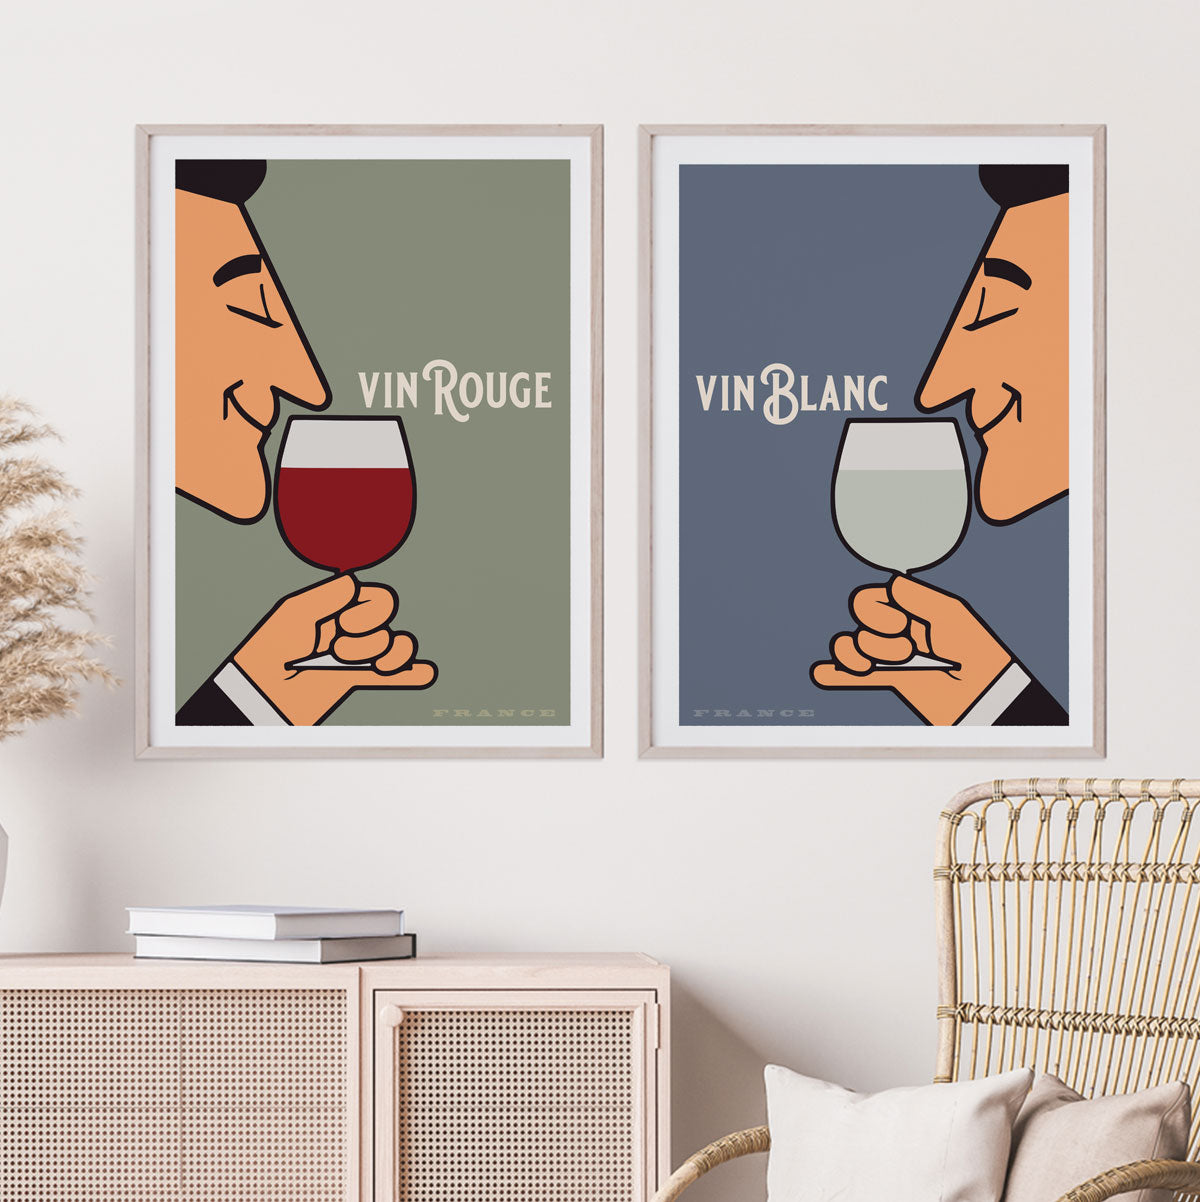 Vin Rouge France vintage retro prints from Places we luv